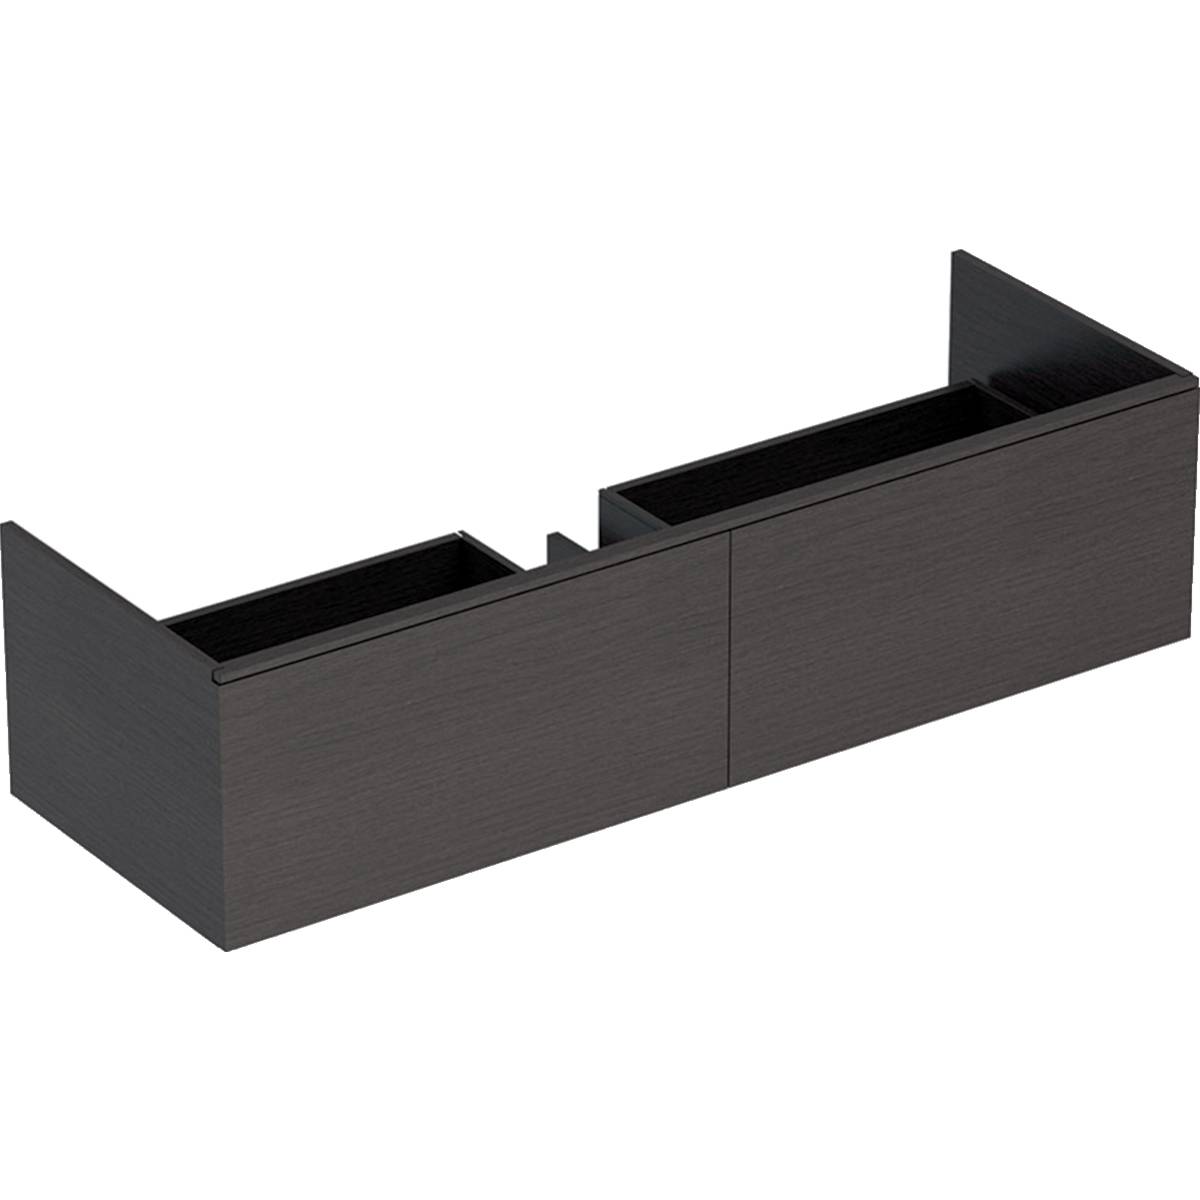 Xeno² cabinet for washbasin made of solid surface material, with two drawers